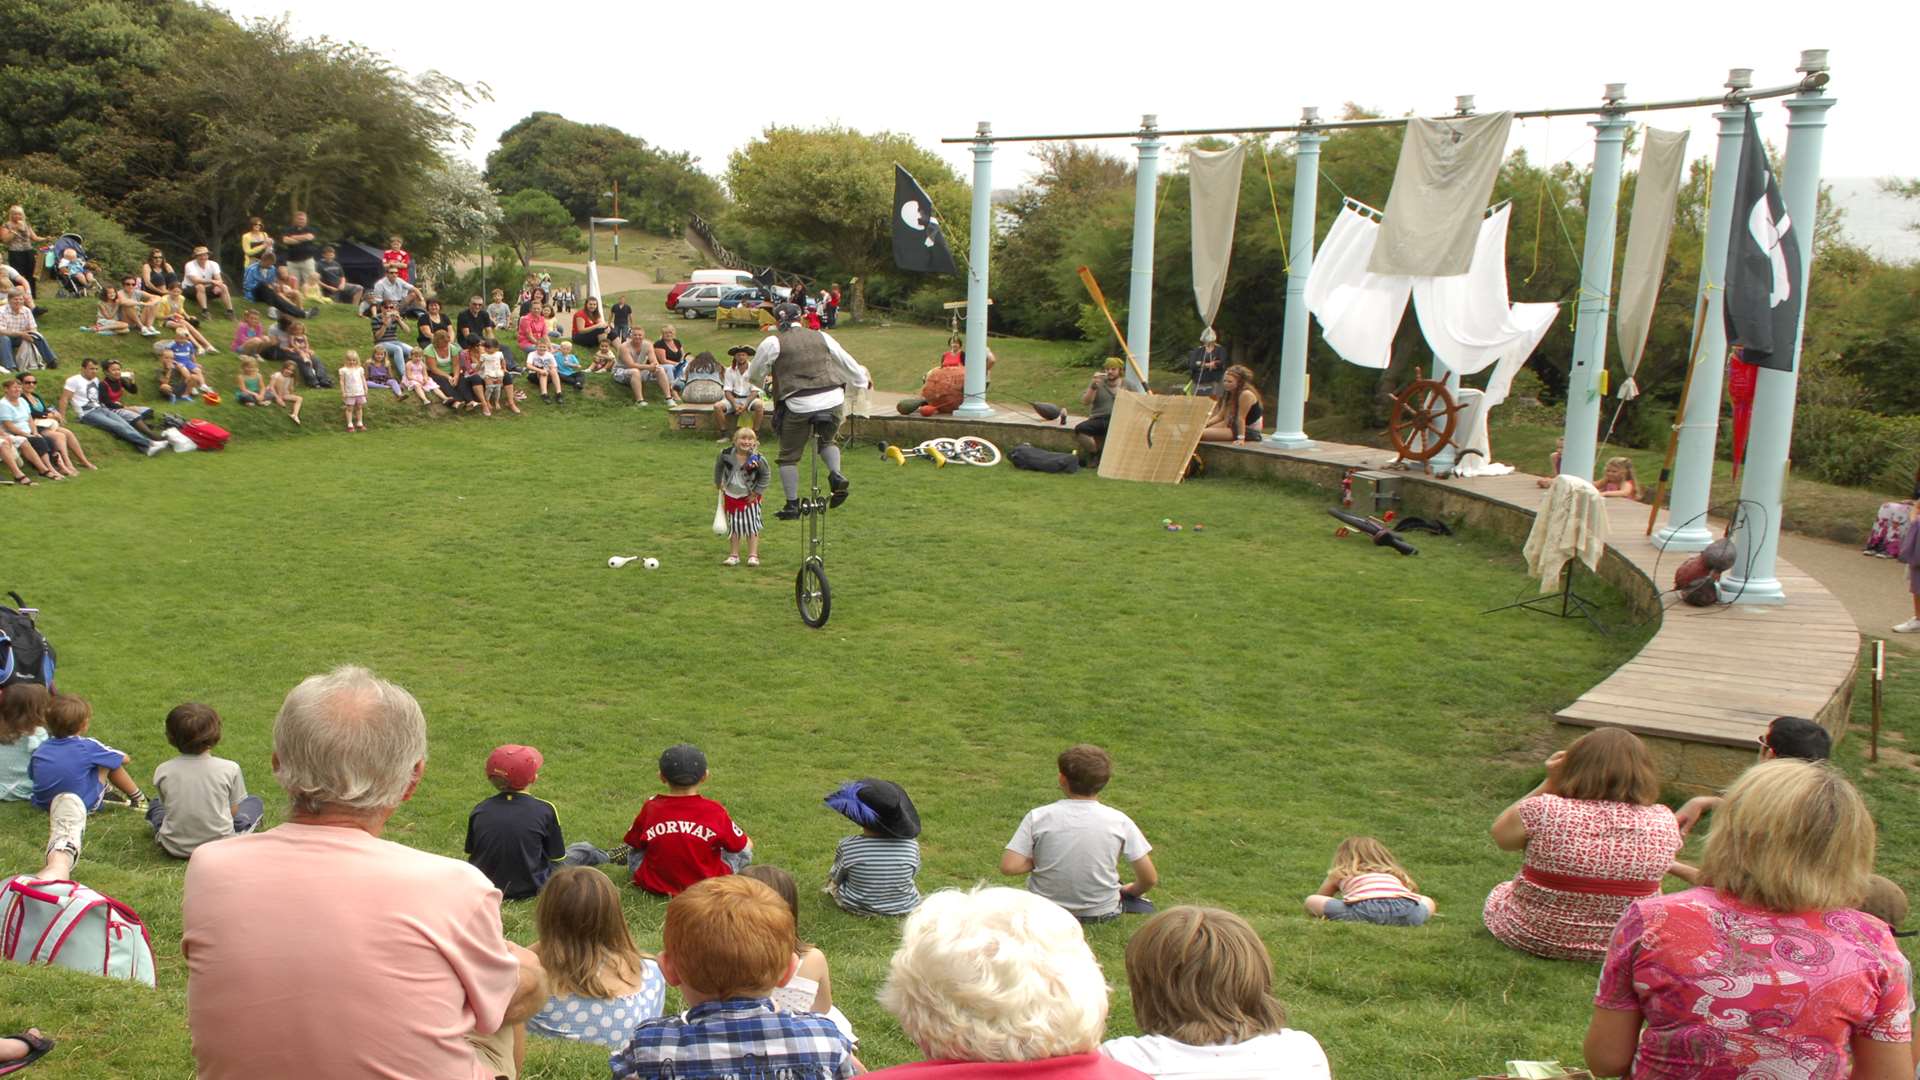 Jimjam Arts hold a pirate themed family day in the Lower Leas Coastal Park, Folkestone